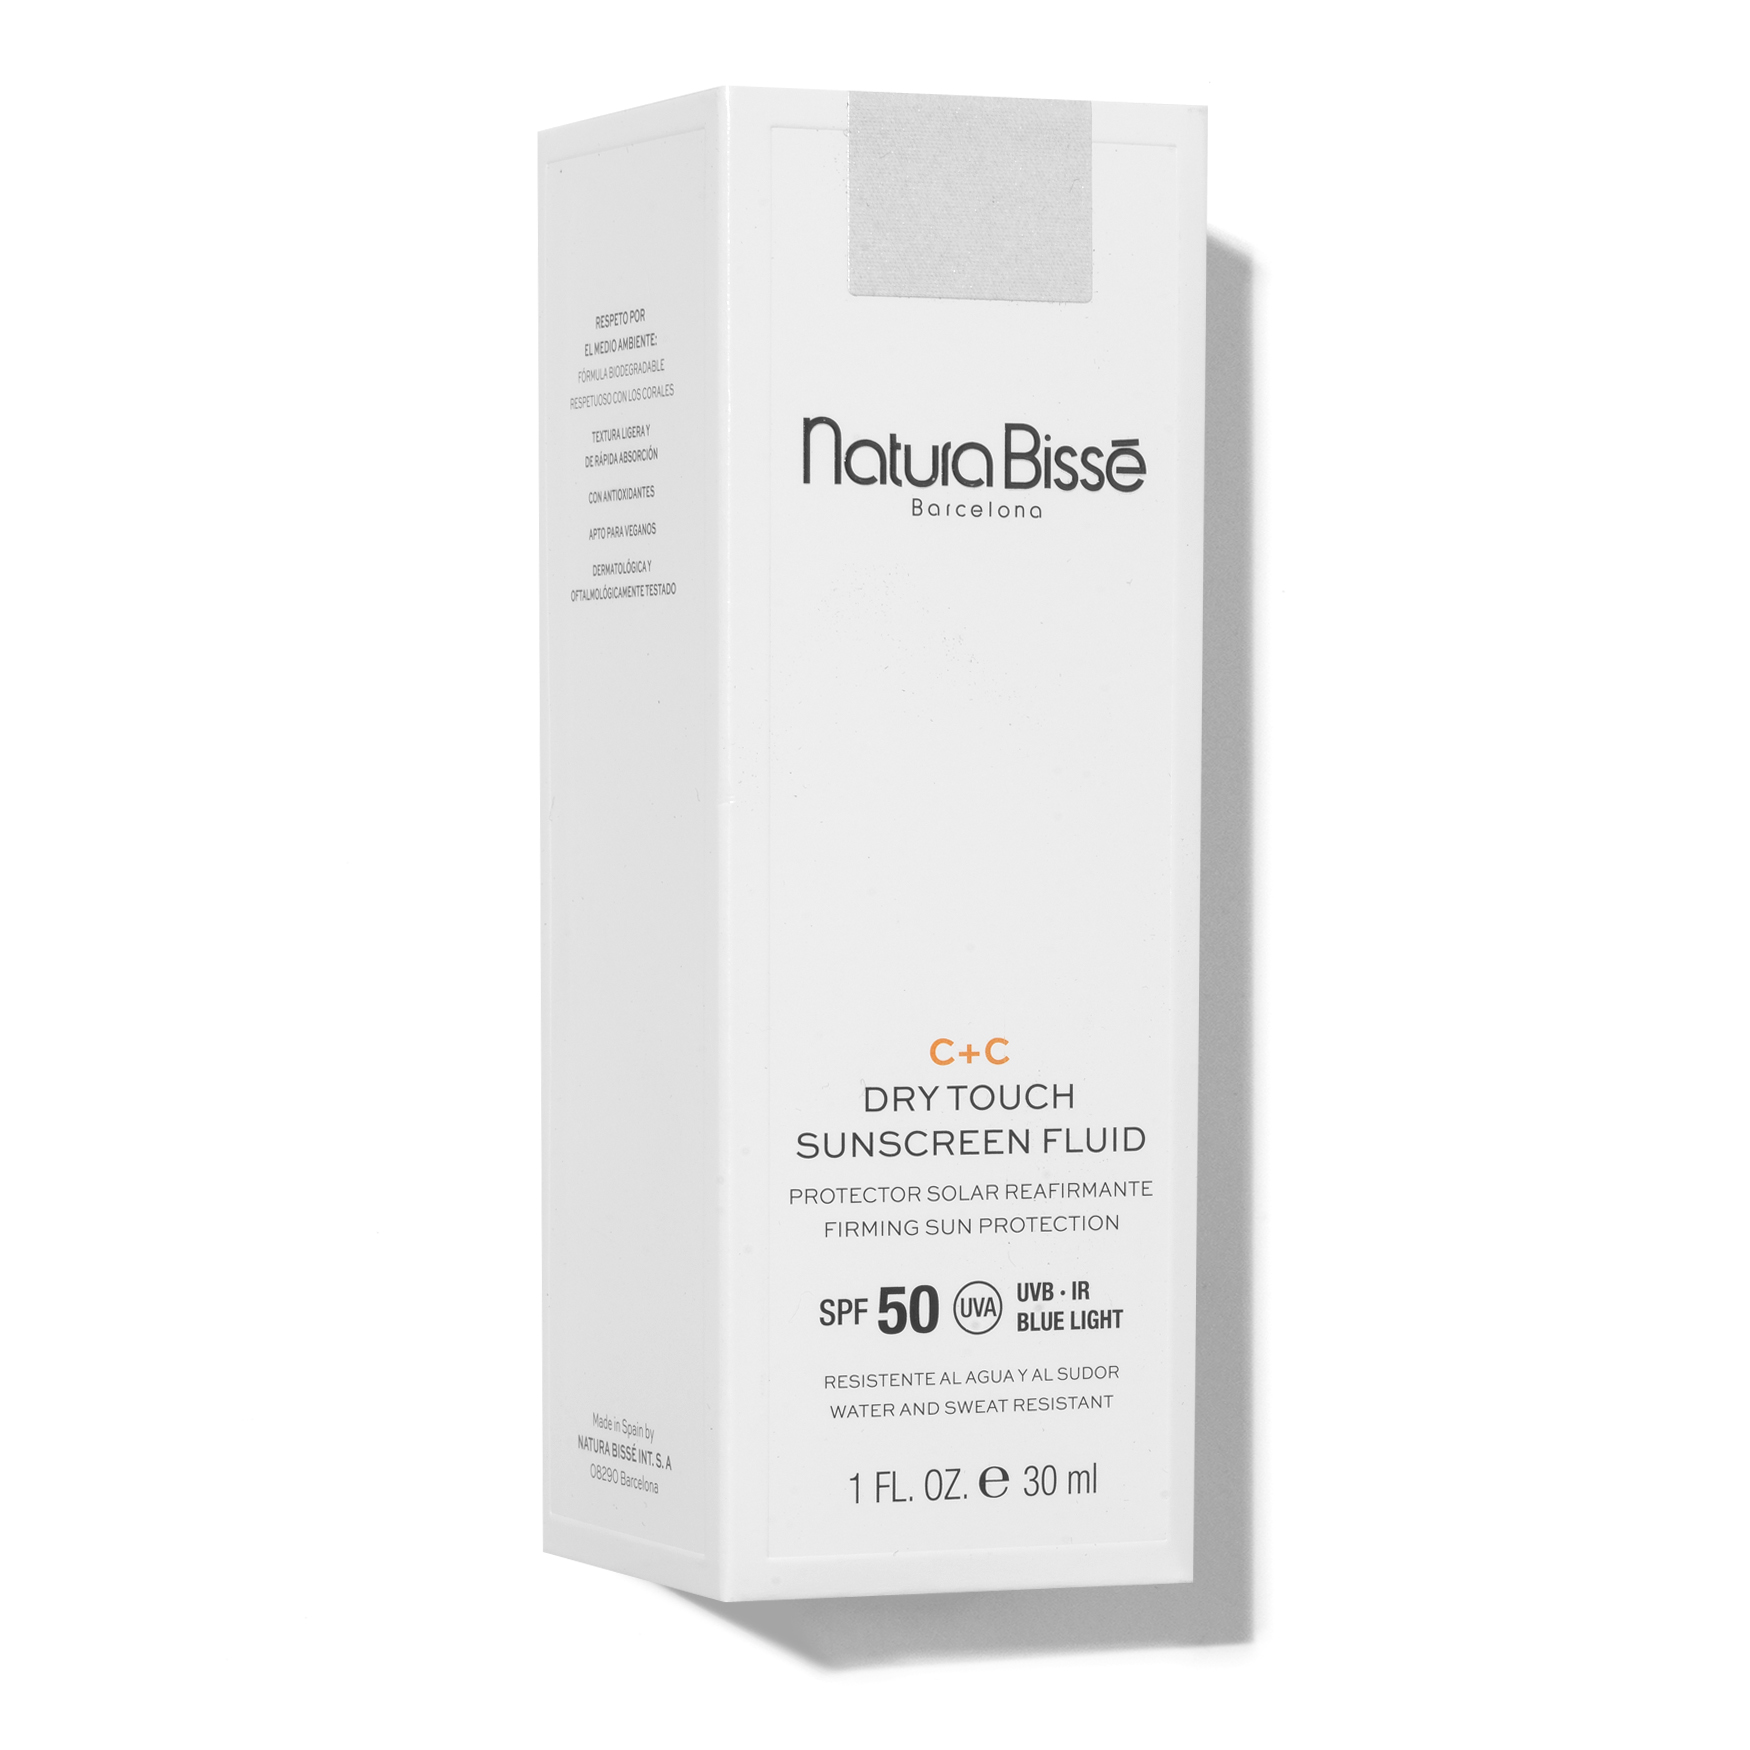 Natura Bissé C+C Dry Touch Sunscreen Fluid SPF 50 | Space NK